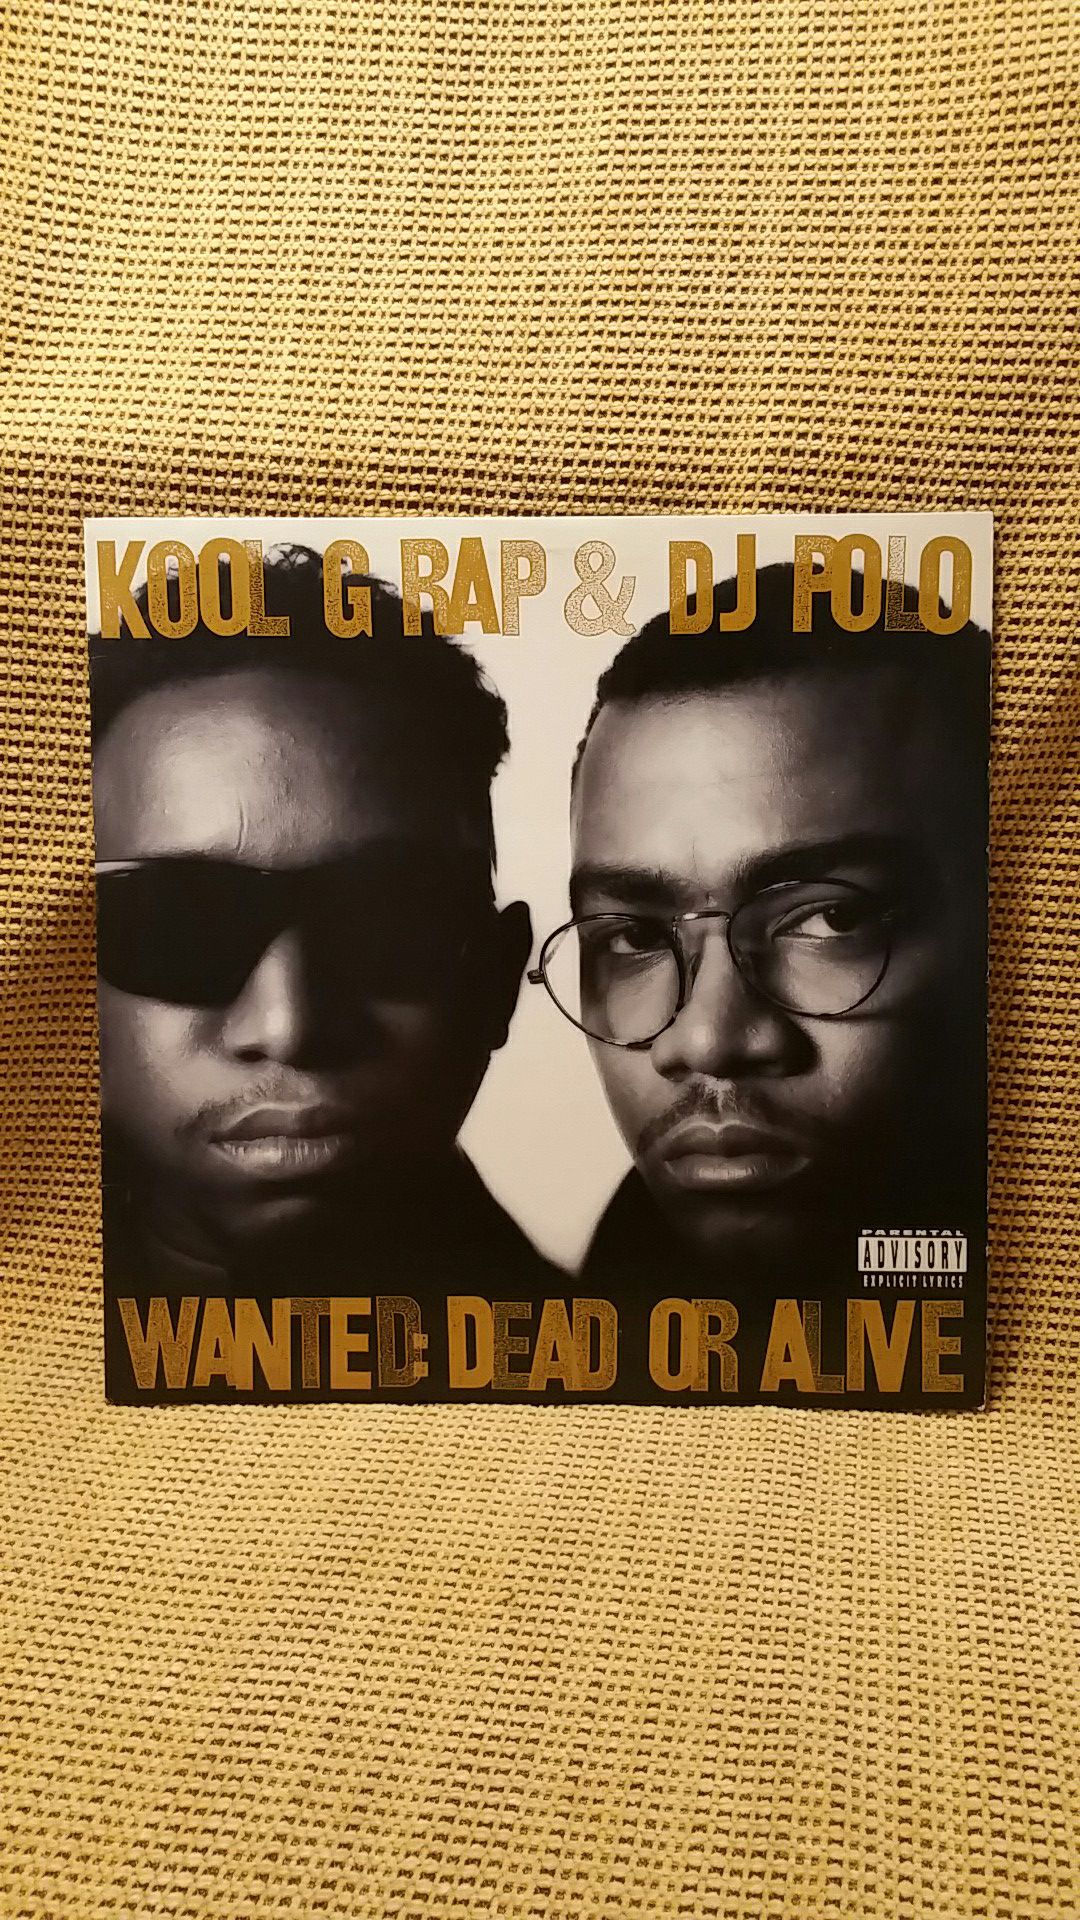 Kool G Rap and D.J. Polo "Wanted: Dead Or Alive" vinyl record Hip Hop